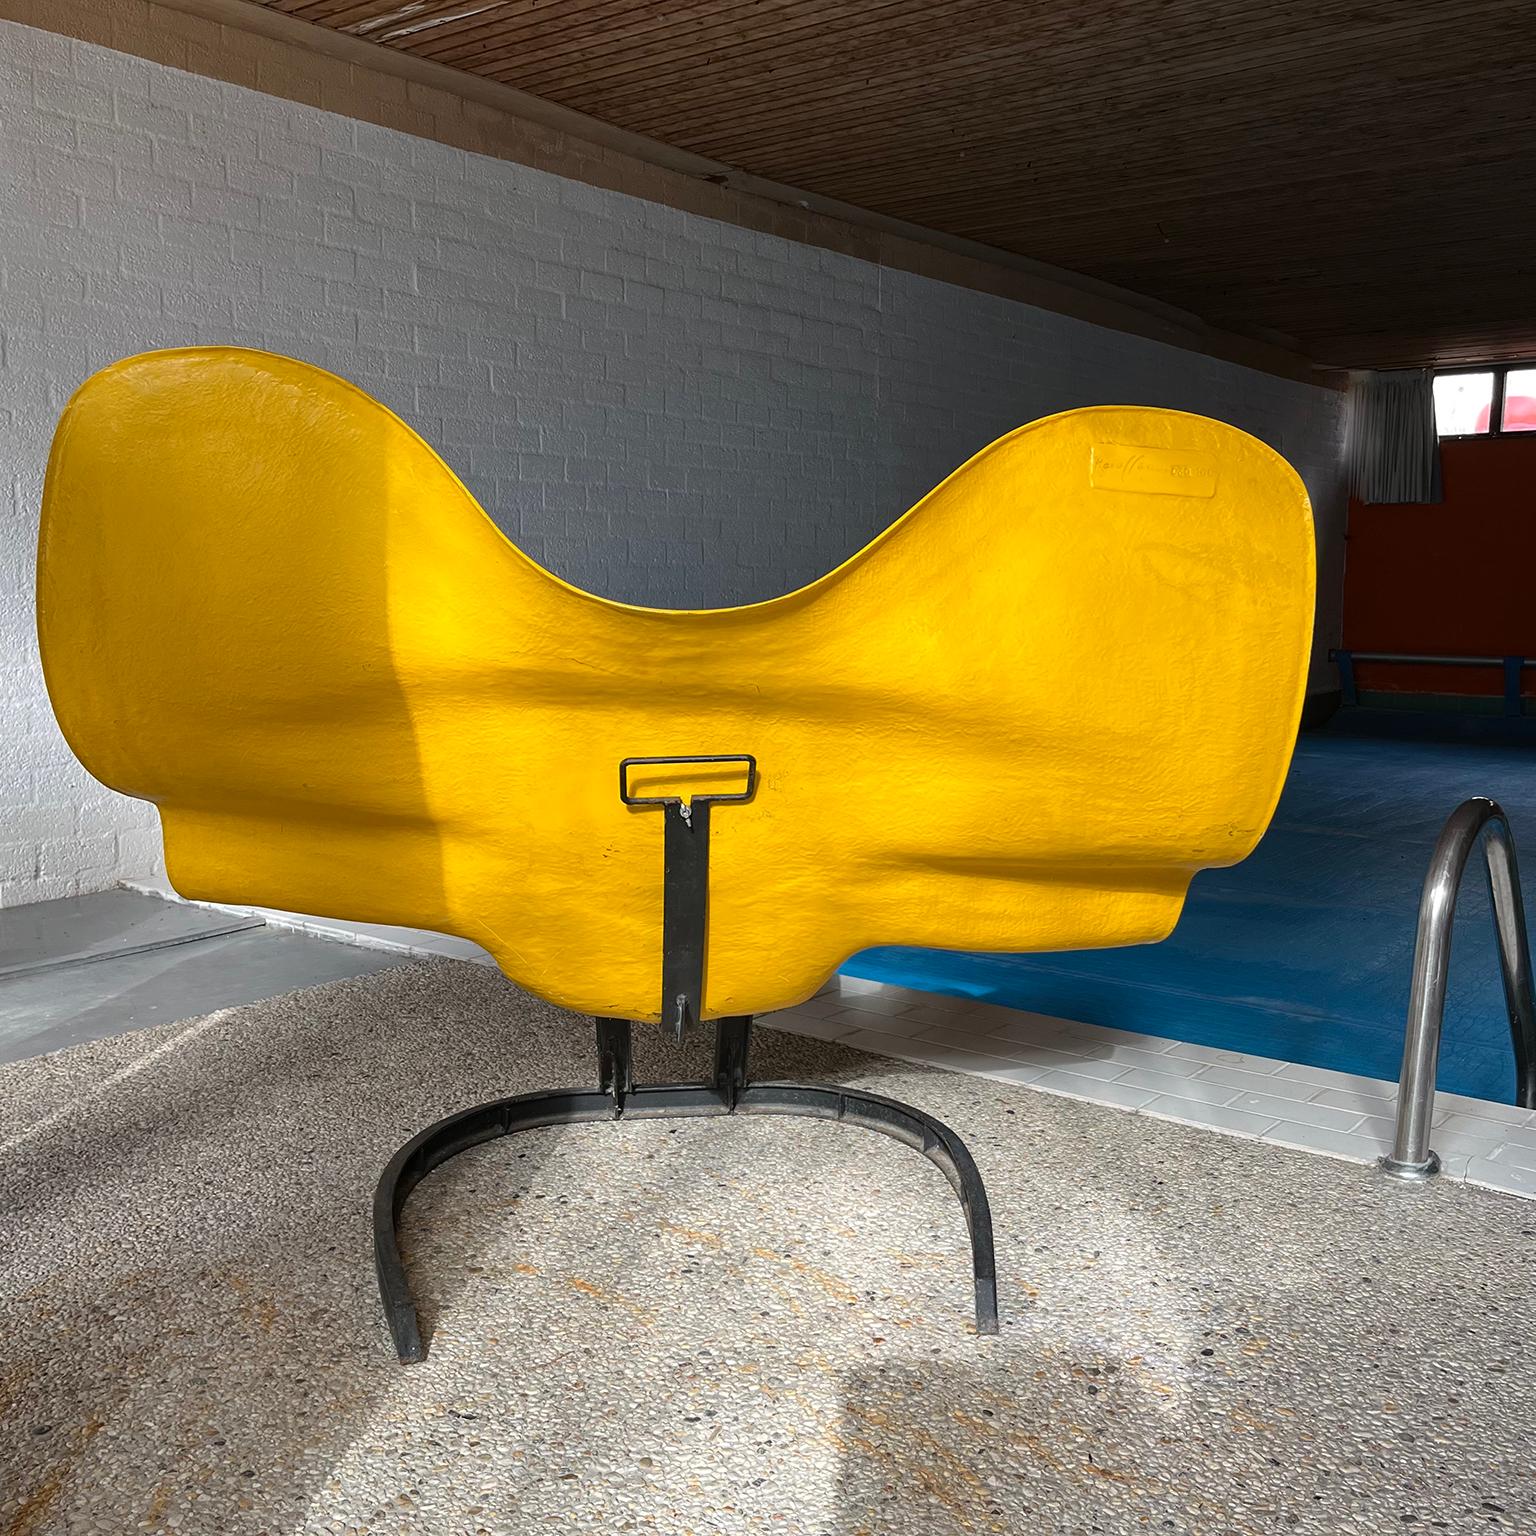 Late 20th Century 1966, Elephant Chair by Bernard Rancillac Yellow with Black Base Limited Edition For Sale